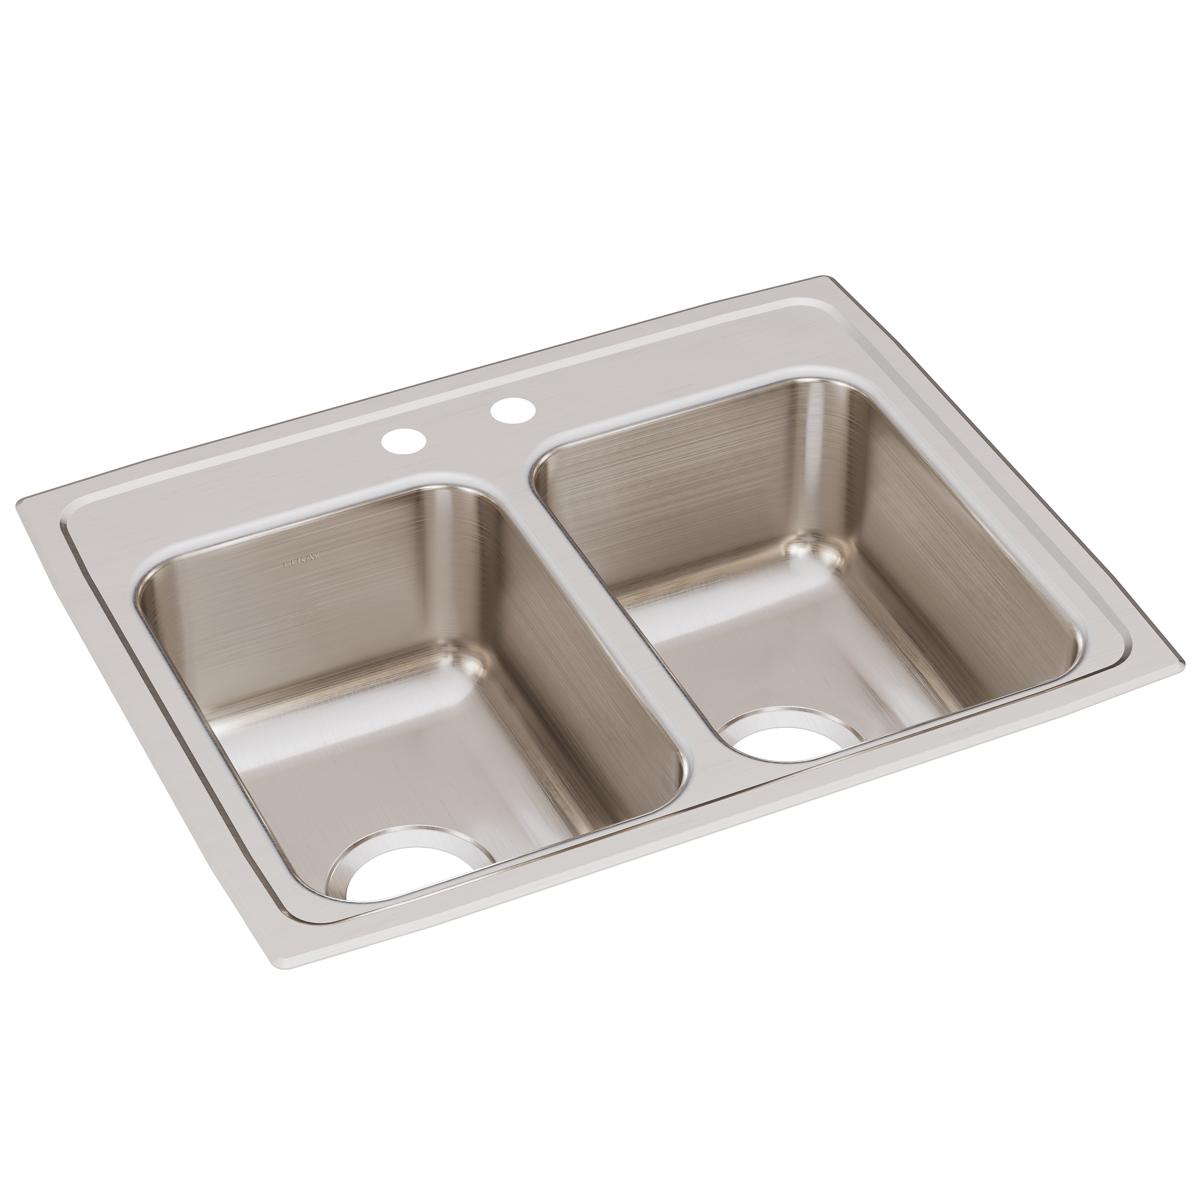 Elkay Lustertone Classic 25" x 19-1/2" x 7-5/8" Equal Double Bowl Drop-in Sink with Quick-clip